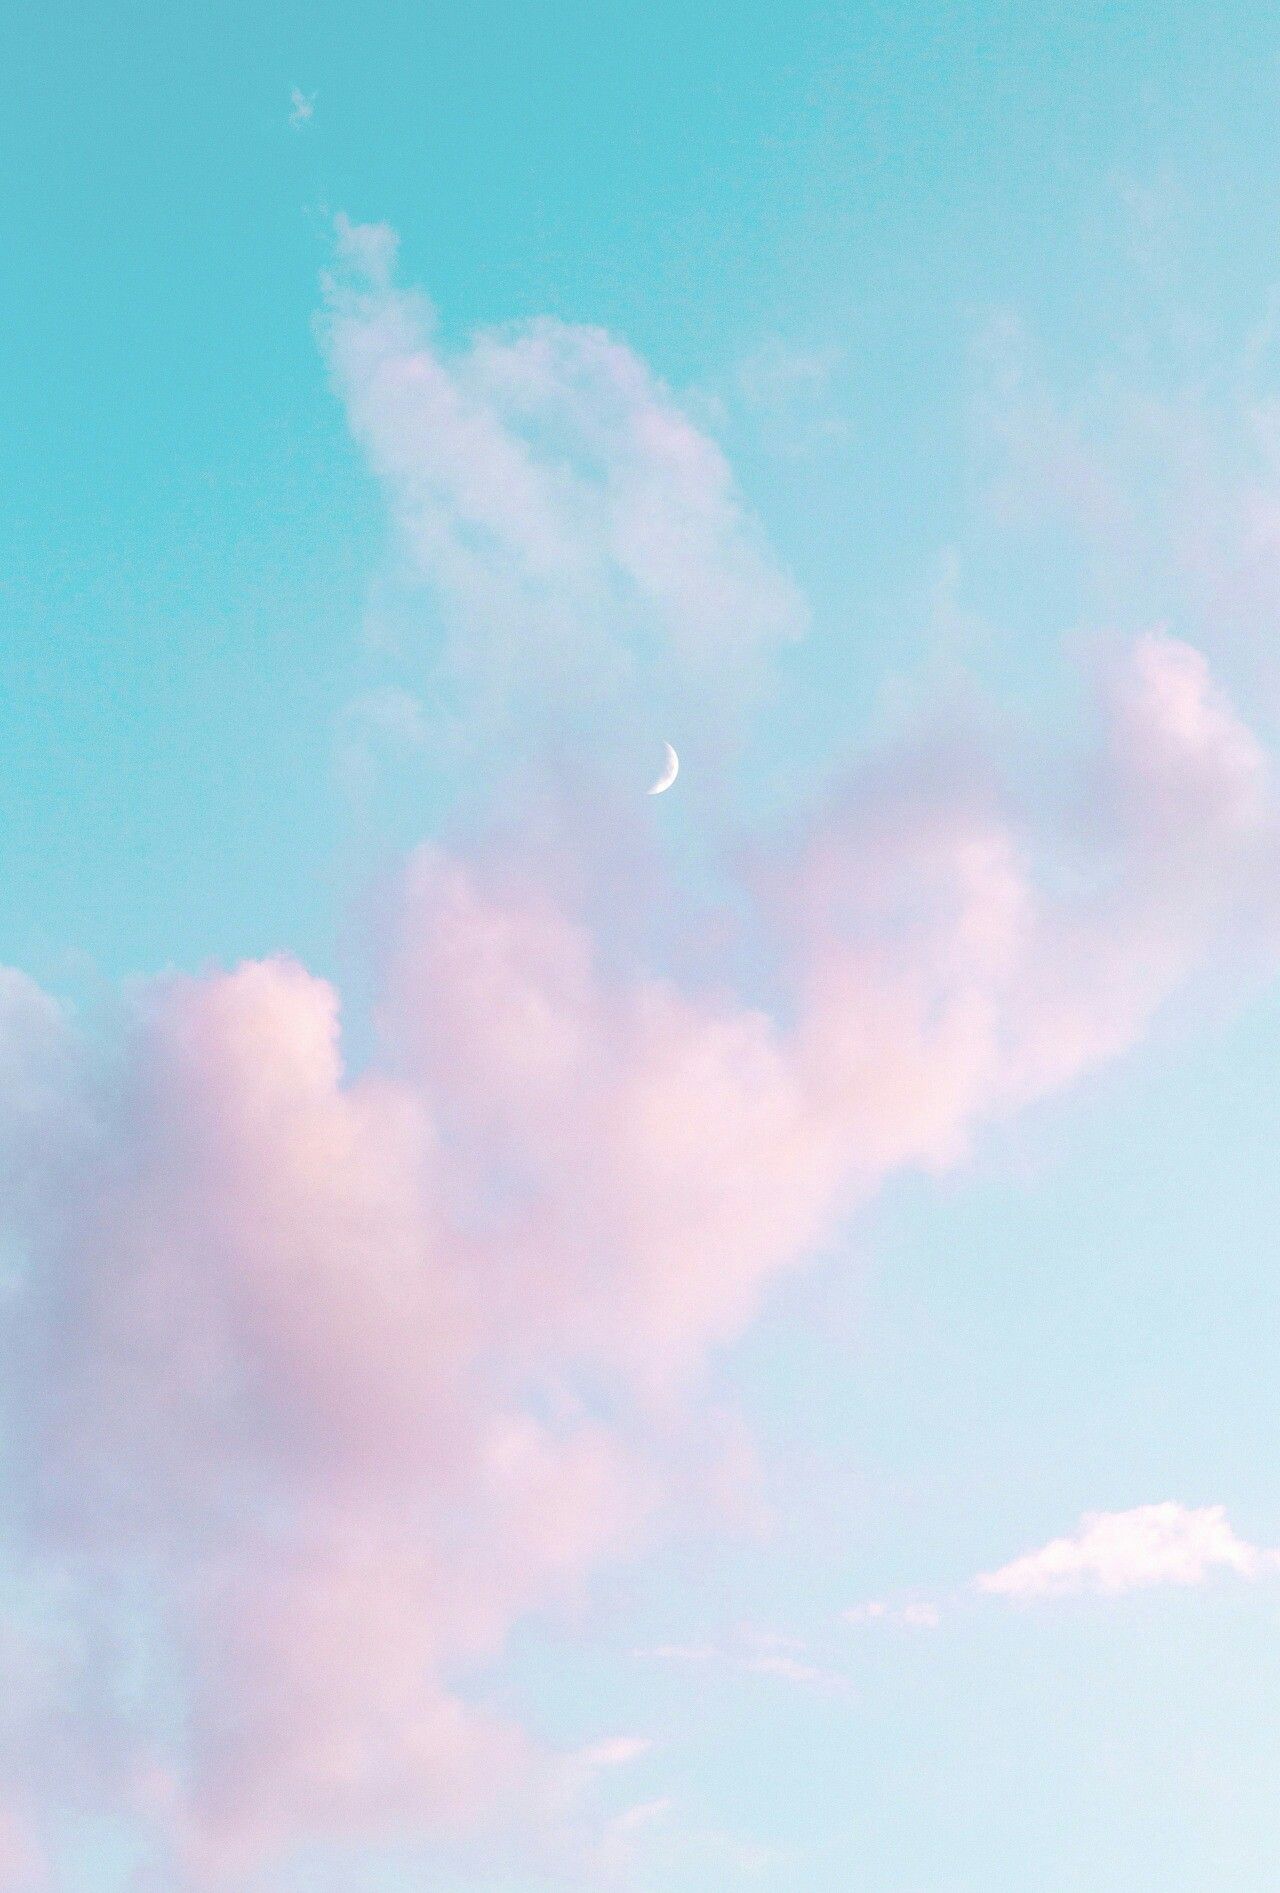 Pastel Aesthetic Clouds Wallpaper on .wallpaper.dog